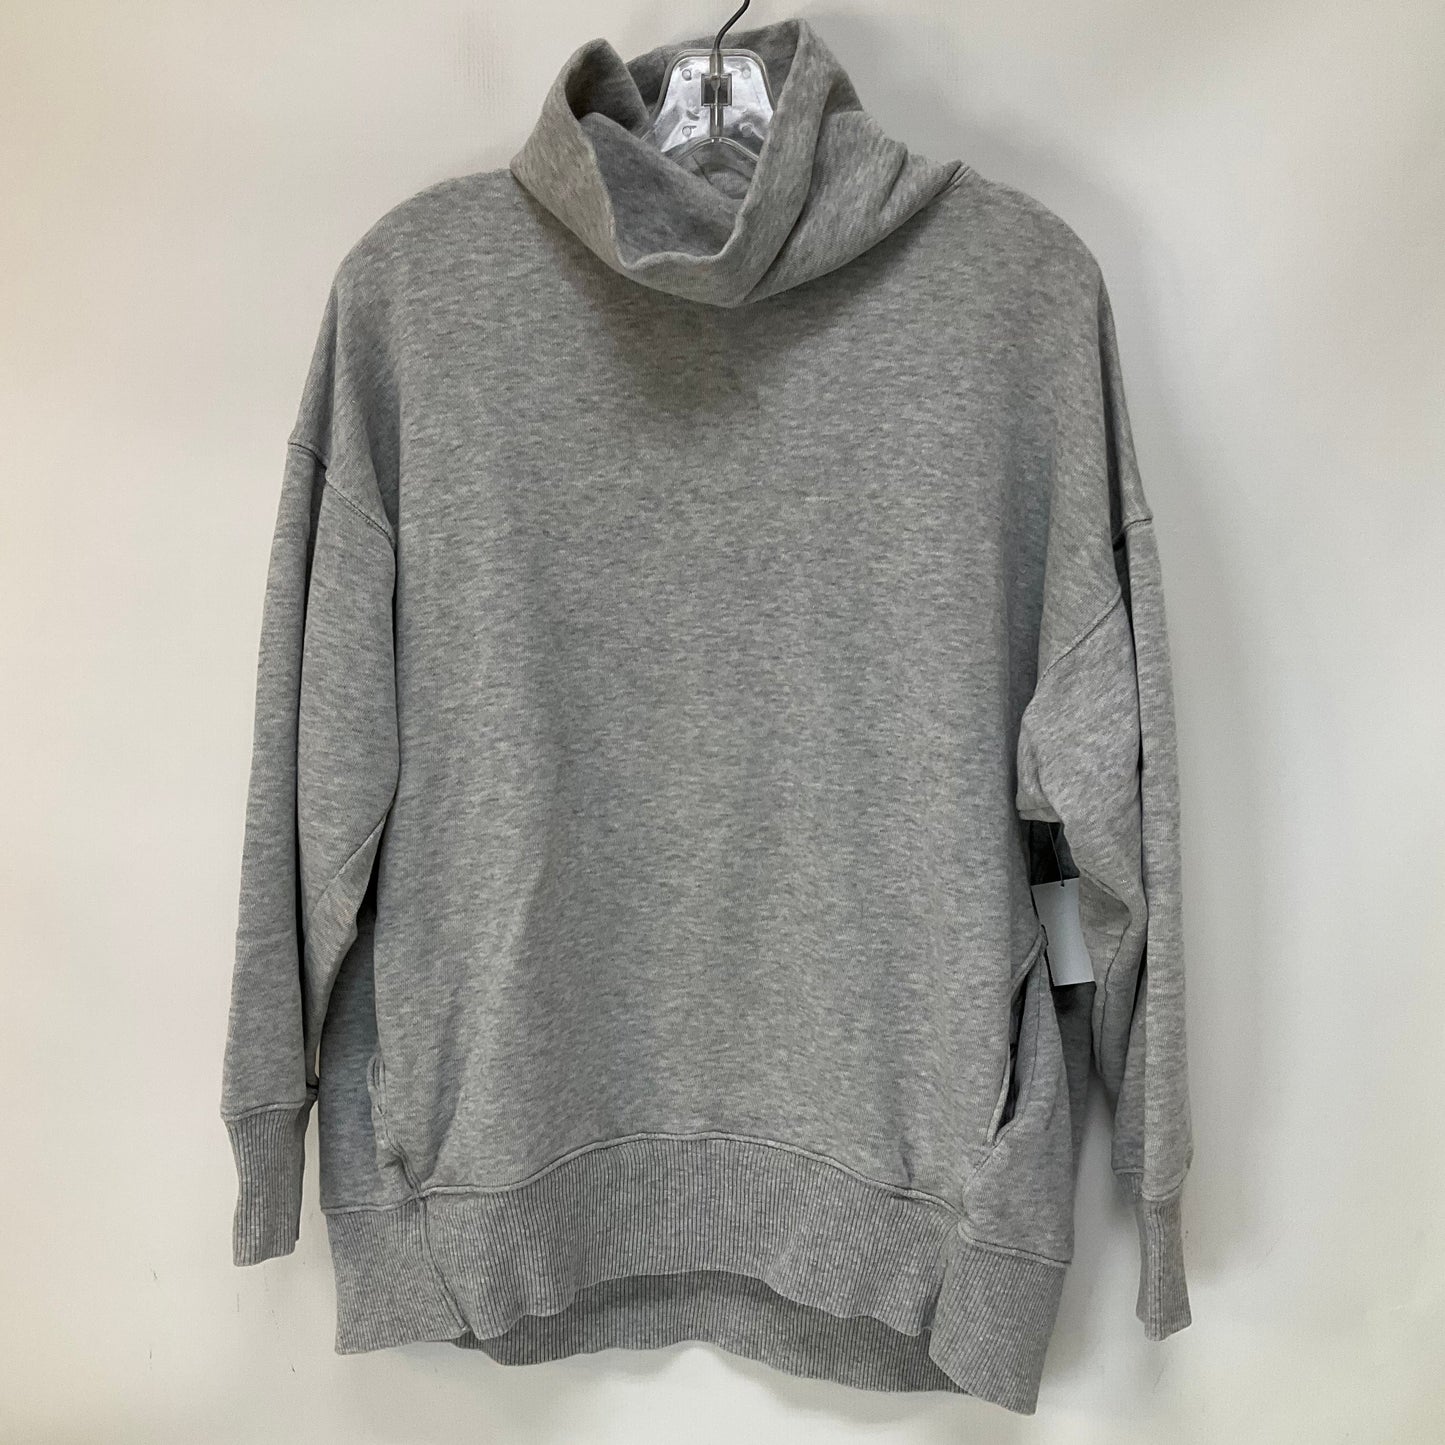 Grey Top Long Sleeve Basic Aerie, Size M